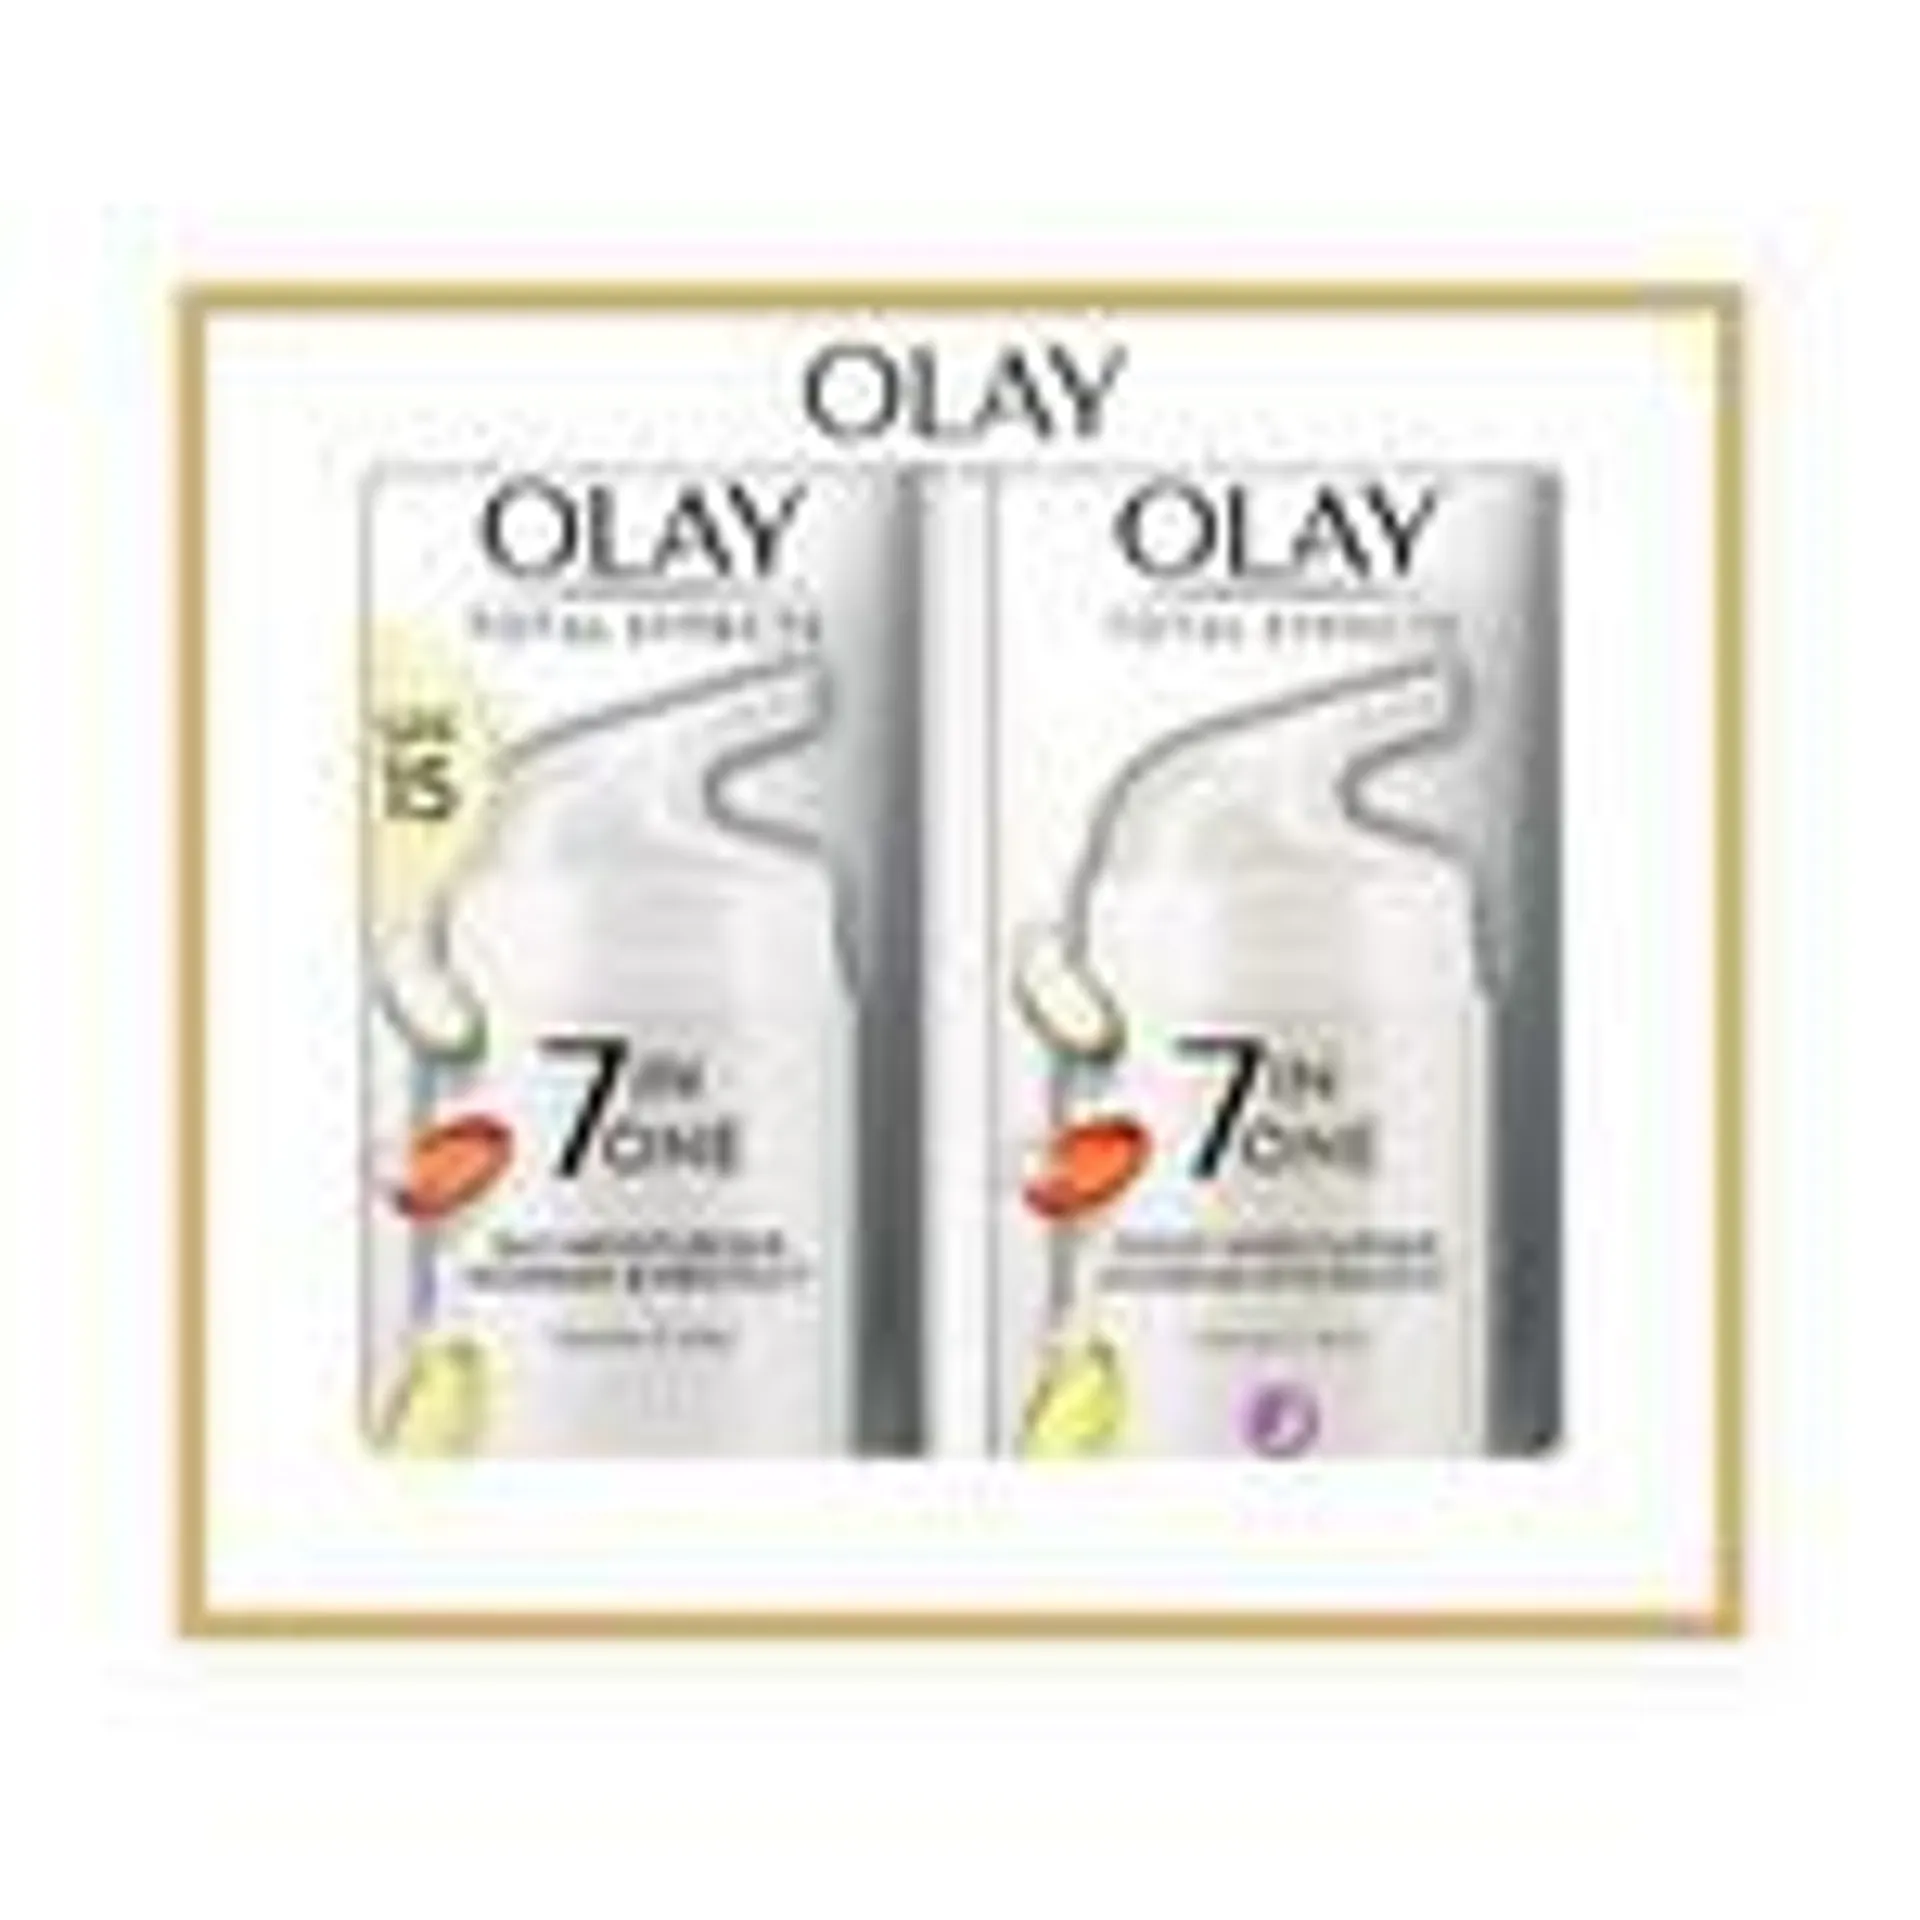 Olay Total Effects Anti-Ageing 7in1 Day & Night Gift Set